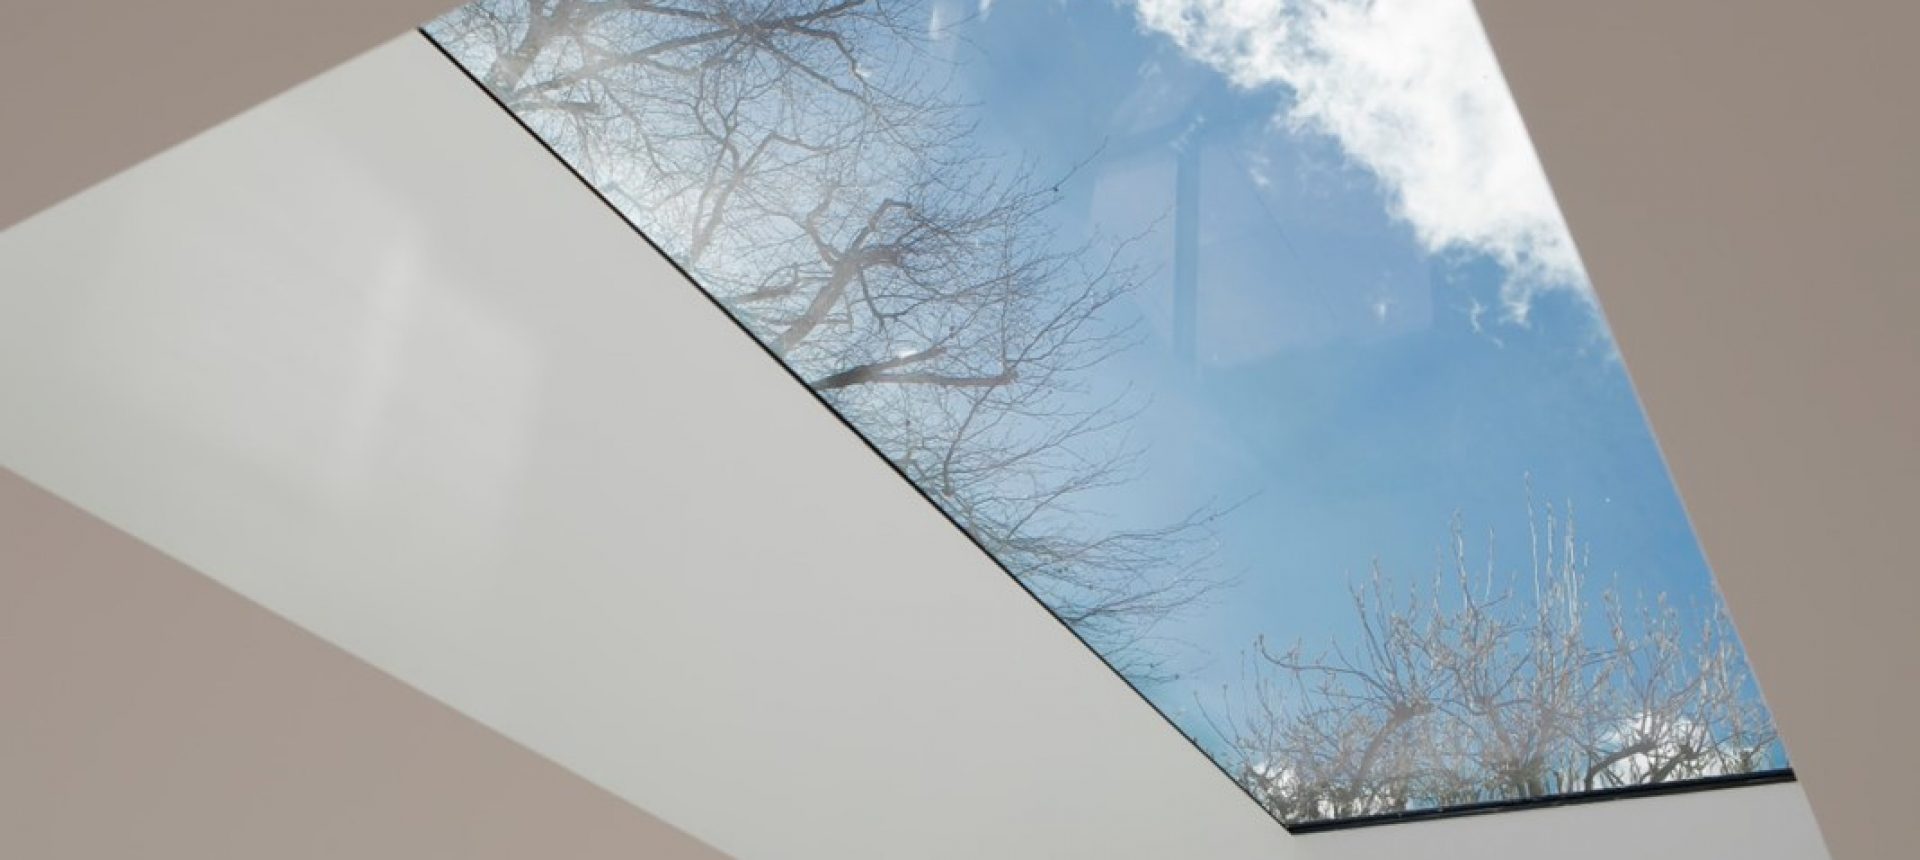 Choosing A Glass Roof - Everything You Need To Know